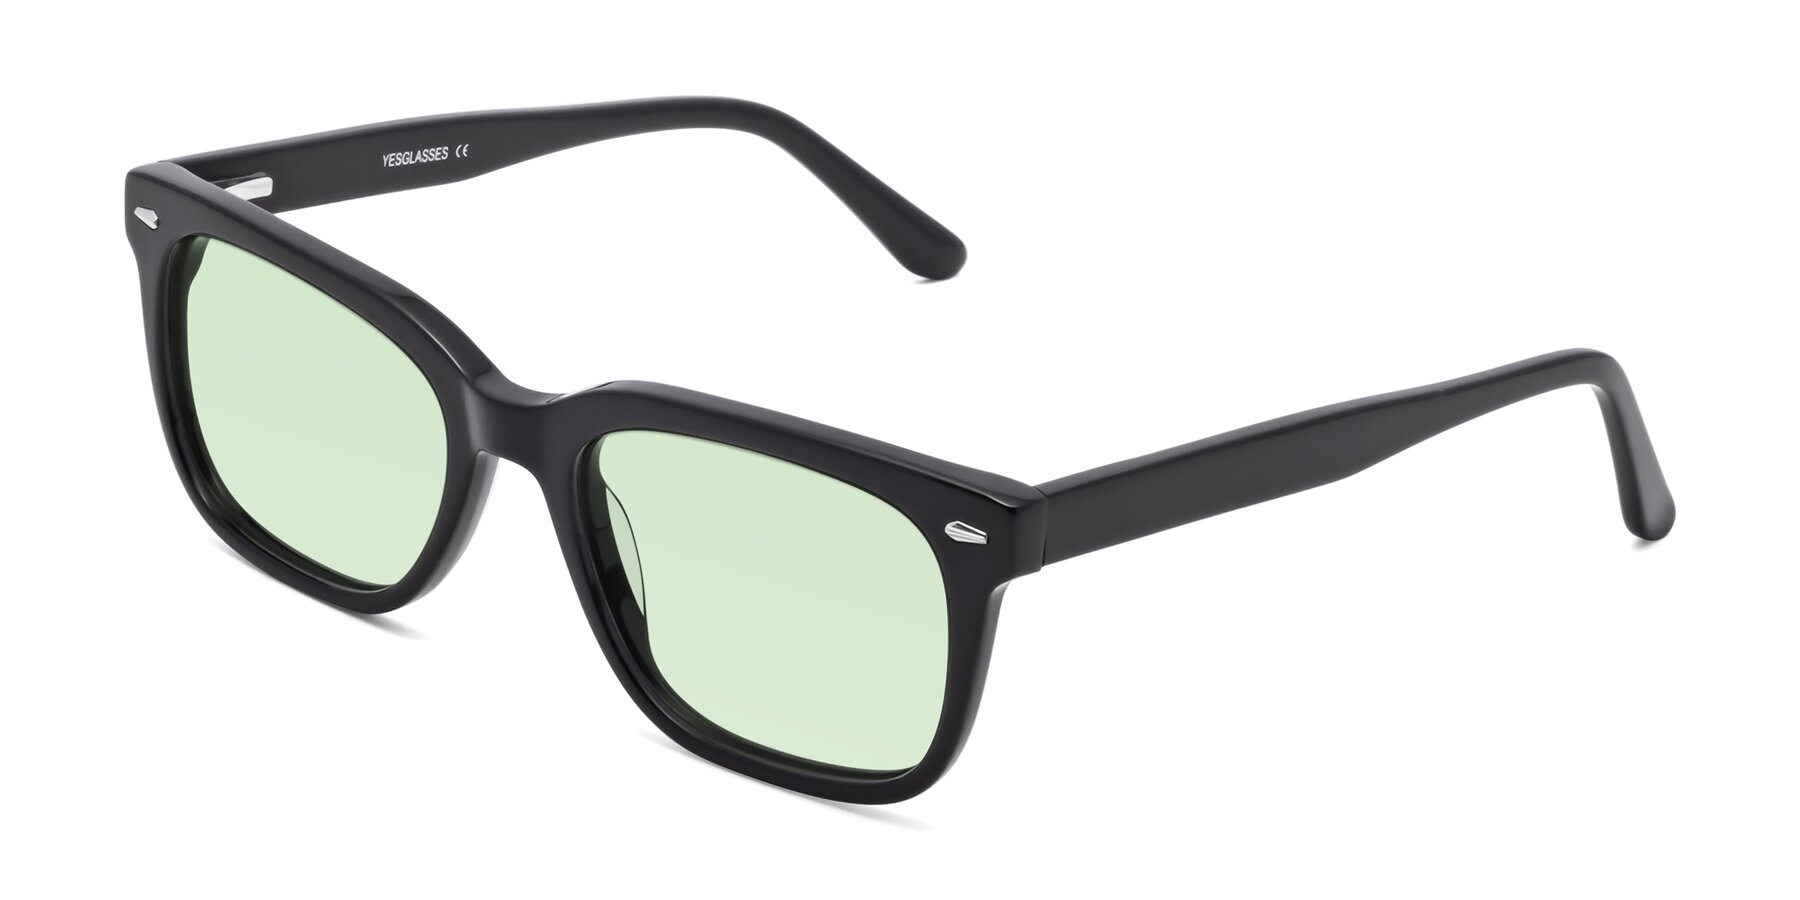 Angle of 1052 in Black with Light Green Tinted Lenses